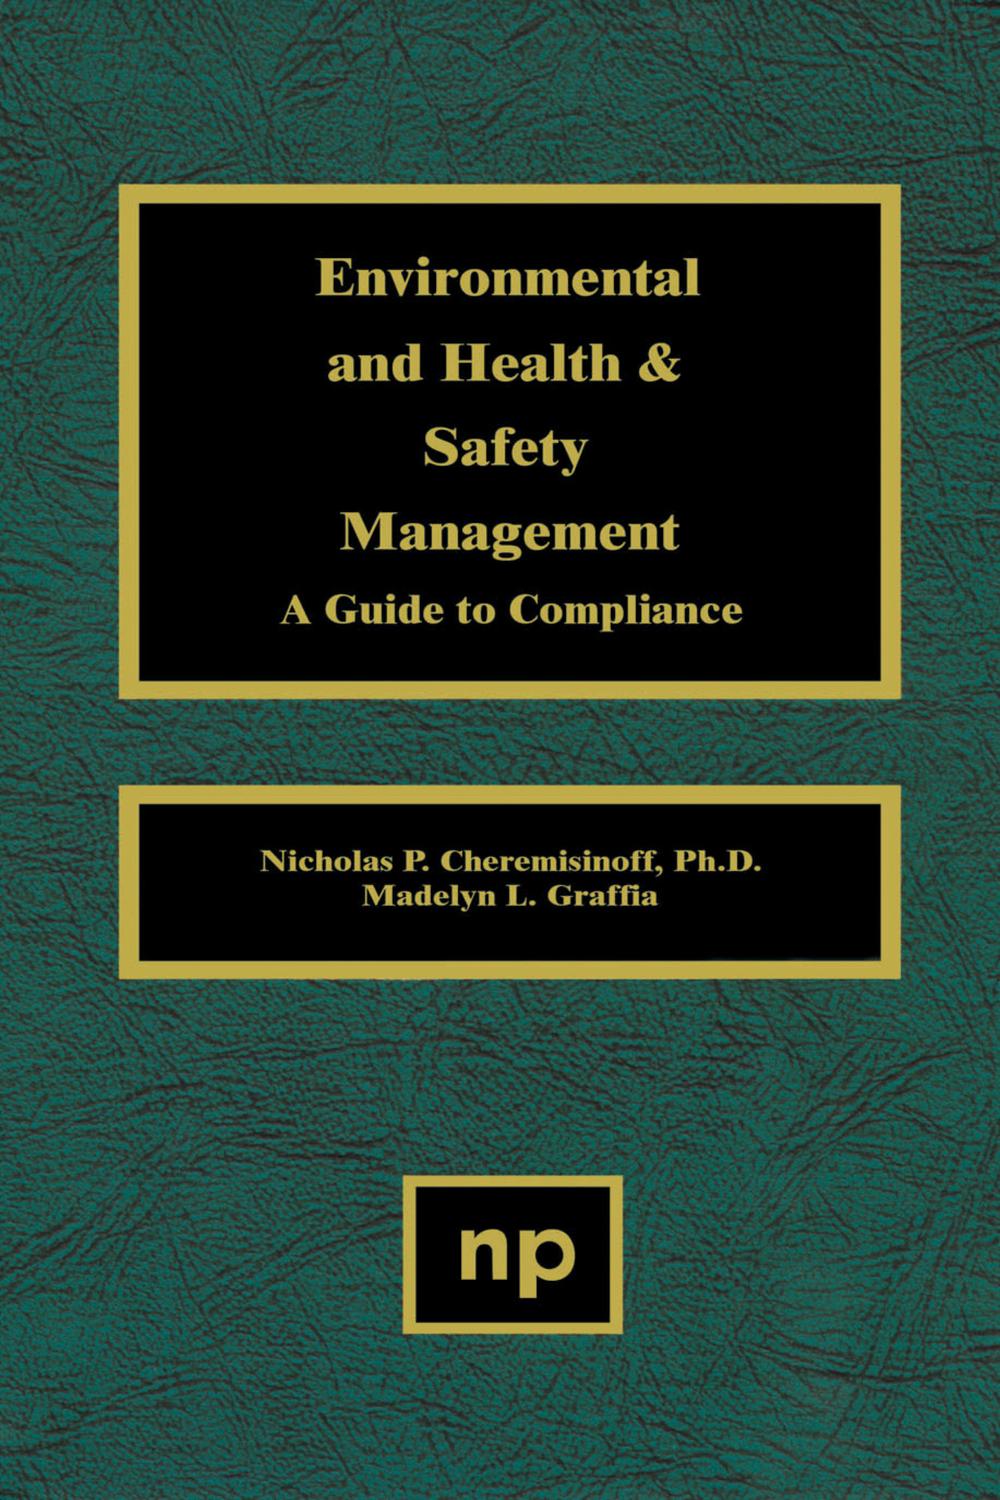 Environmental and Health and Safety Management - Nicholas P. Cheremisinoff, Madelyn L. Graffia